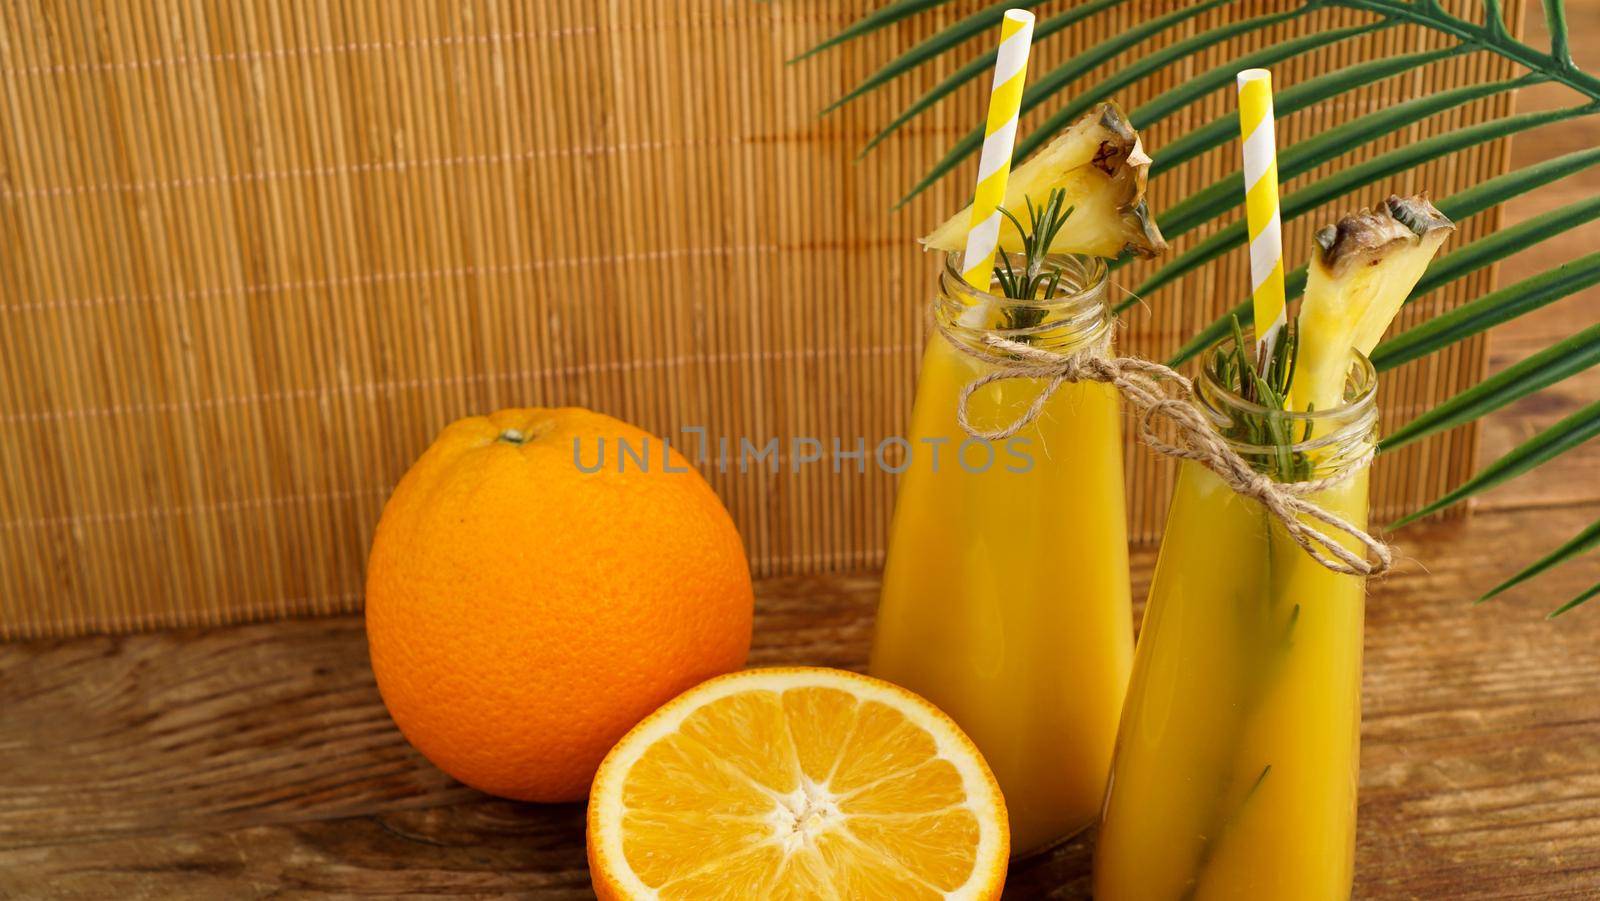 Two bottles of tropical juice with paper straws. Oranges, pineapple and rosemary for decoration. Wooden background.